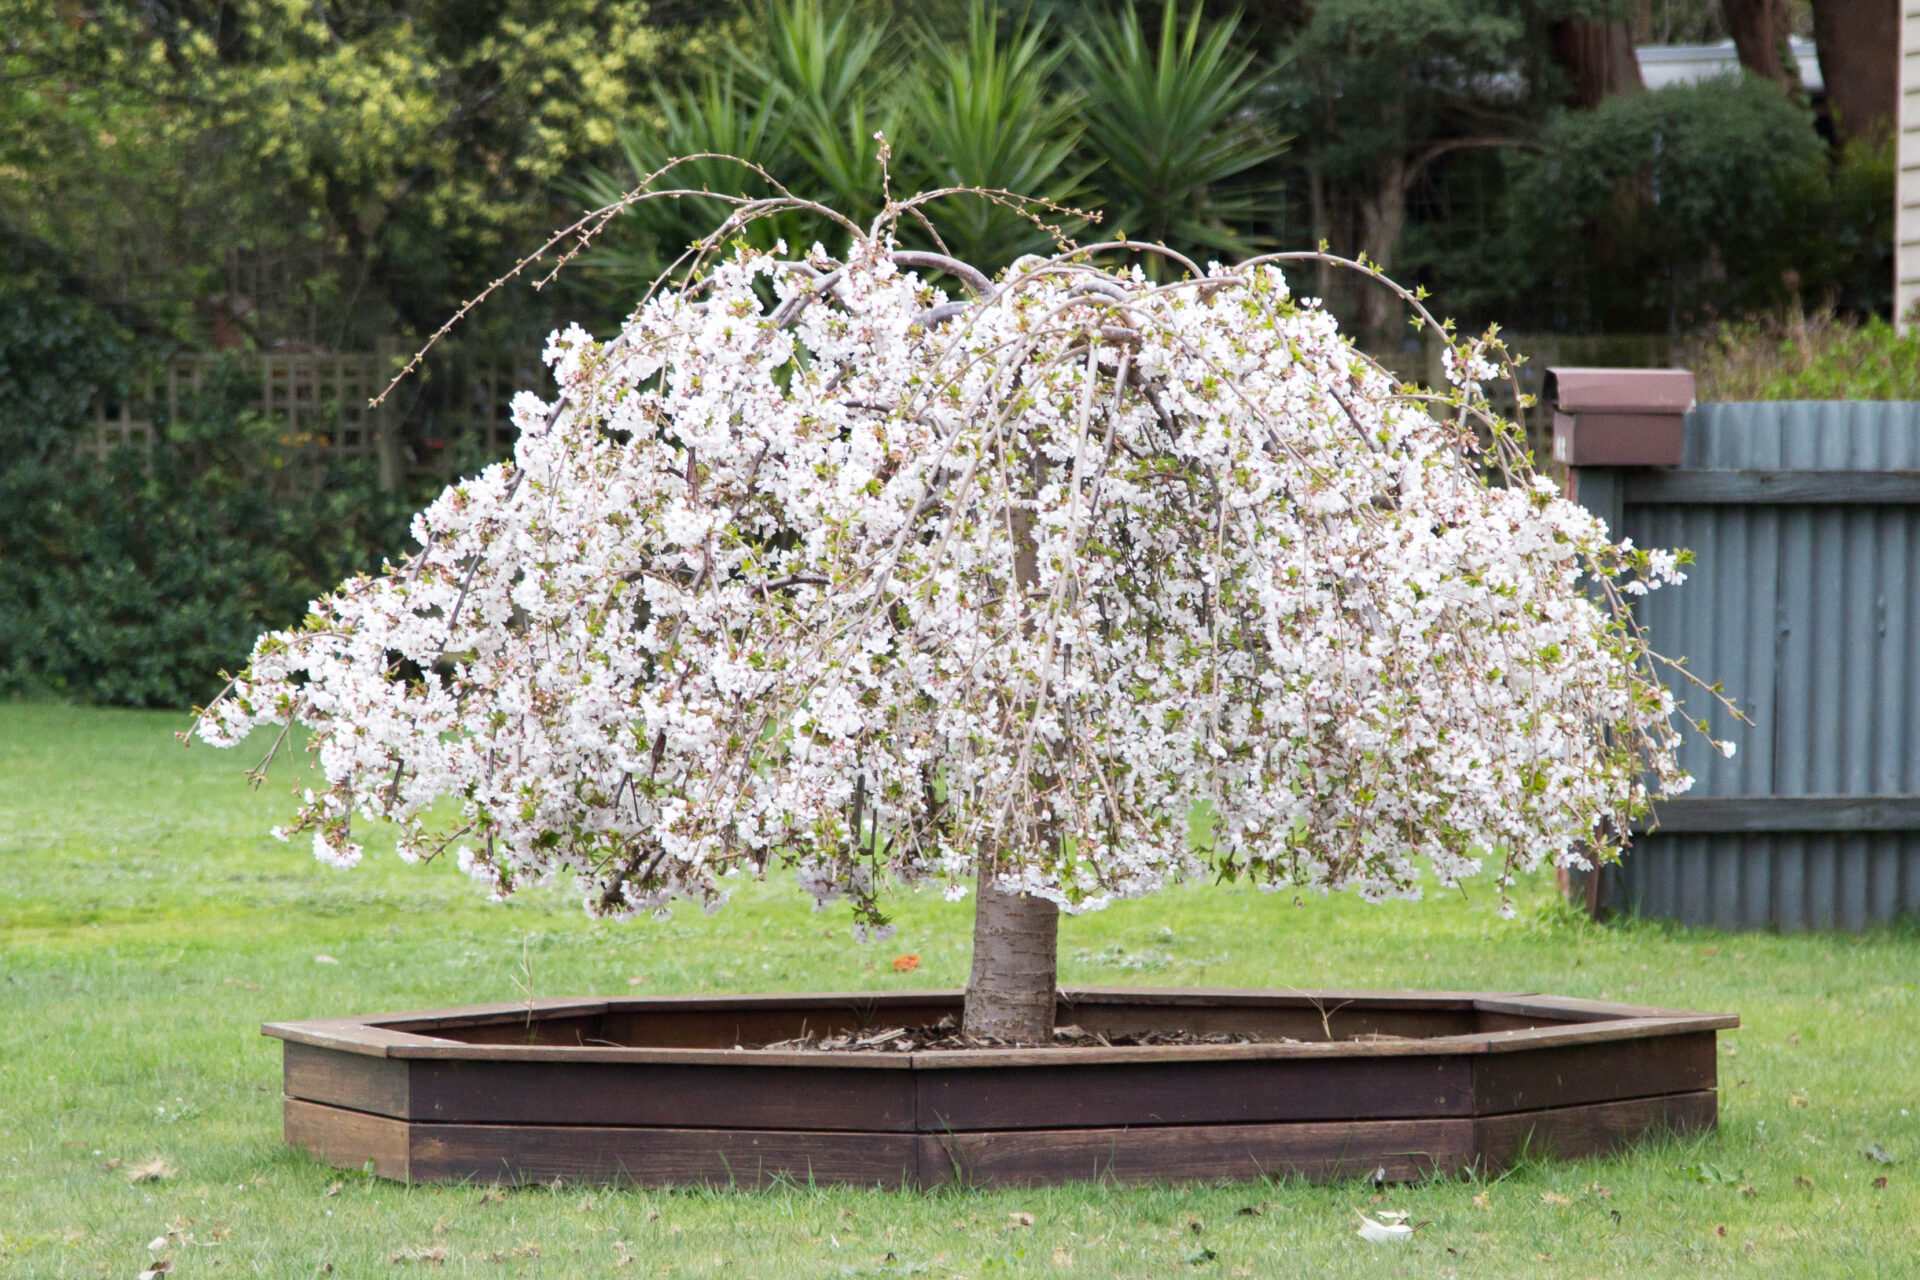 Get a $150 Weeping Cherry Tree for just $30 when you spend over $200